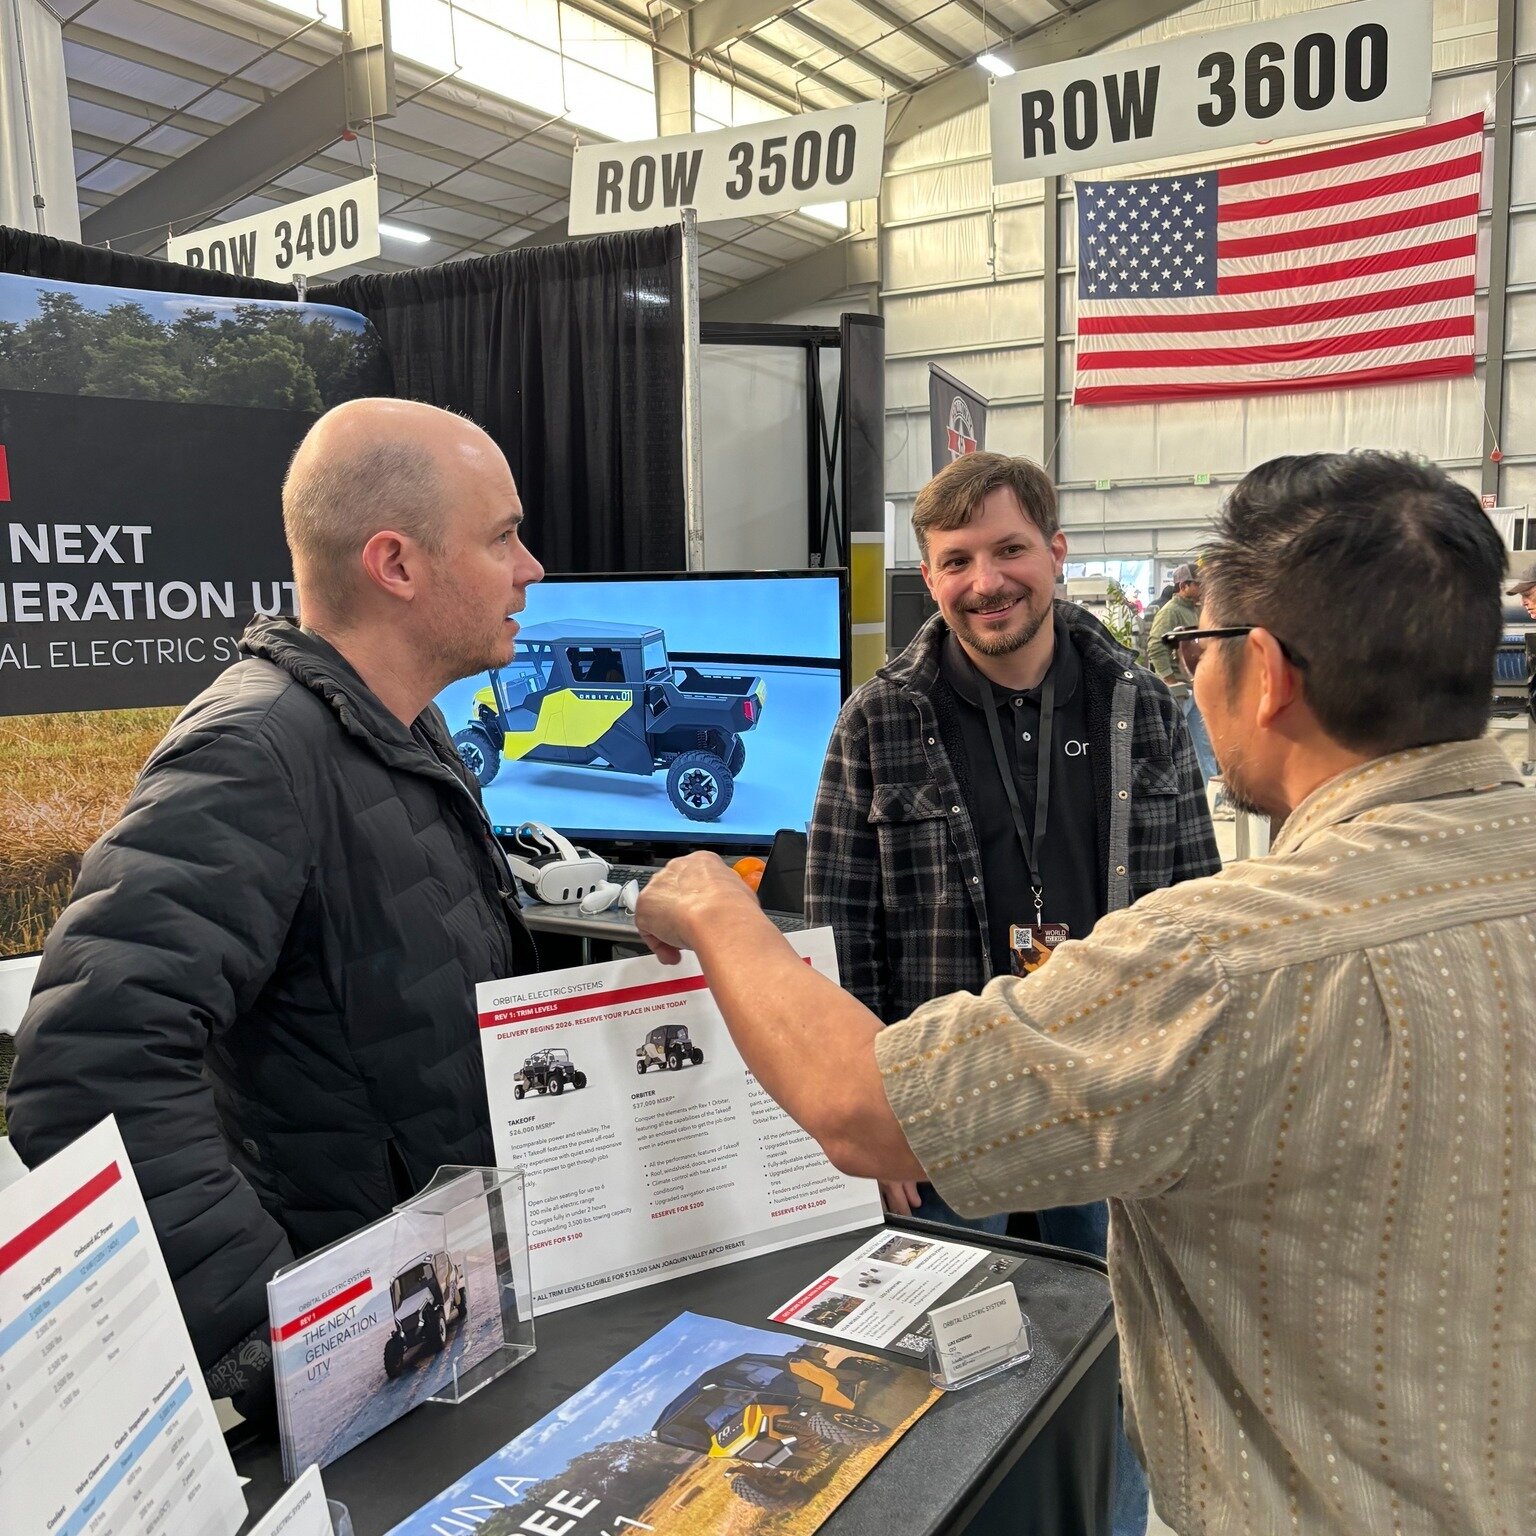 Introducing the REV 1 to the crowd at the @worldagexpo in Tulare, CA.

Stop by today for your last chance to see the REV 1 in VR!

#wae24 #electricUTV #sxs #utv #sidebyside #rev1